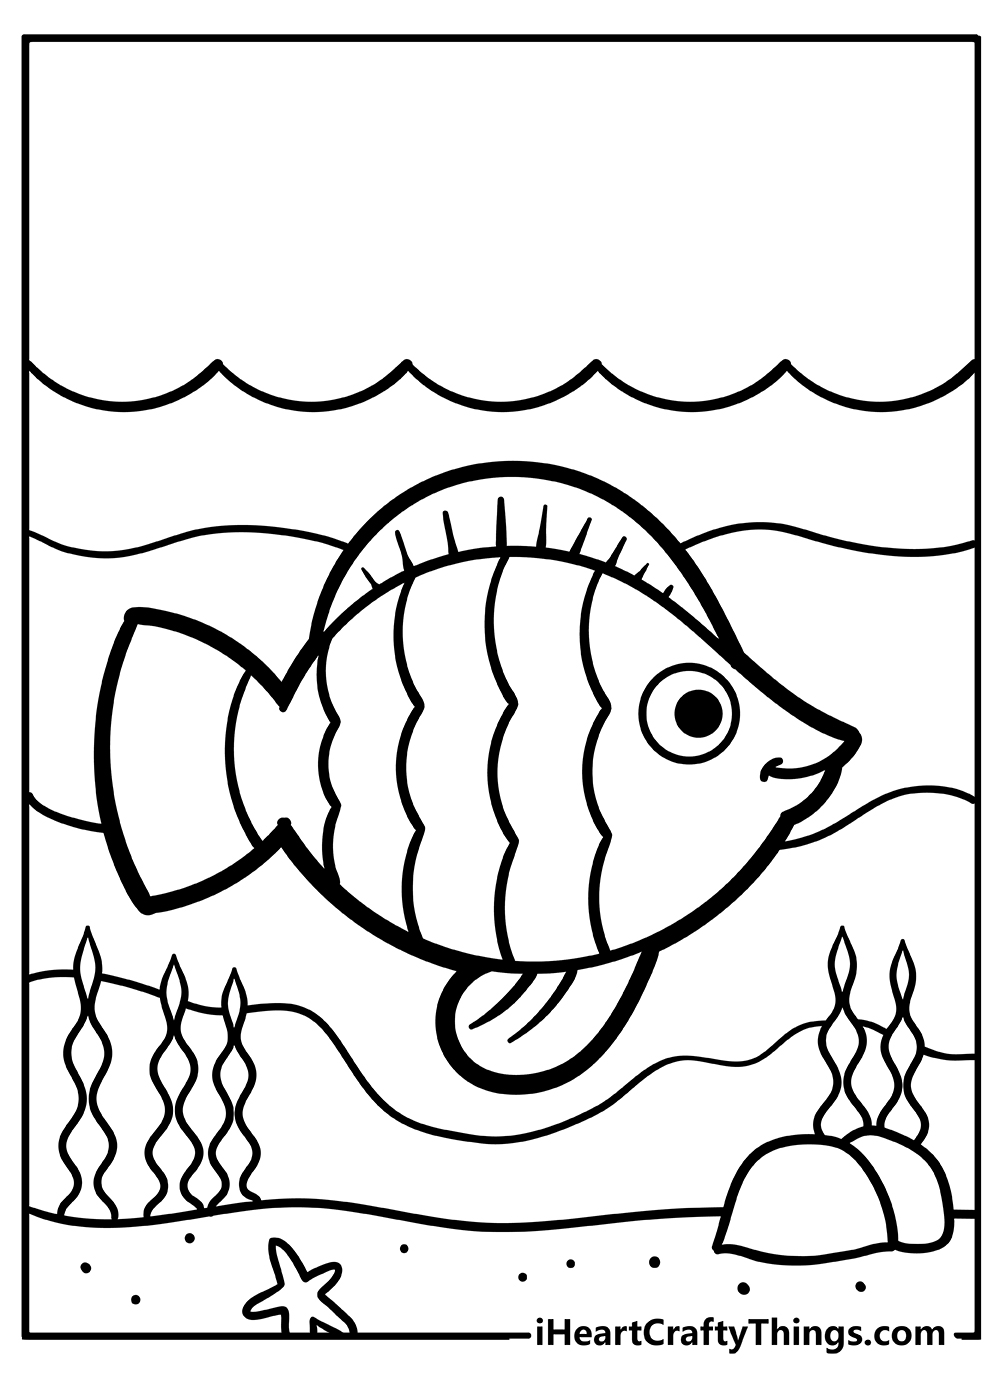 Kindergarten Coloring Pages for adults free printable